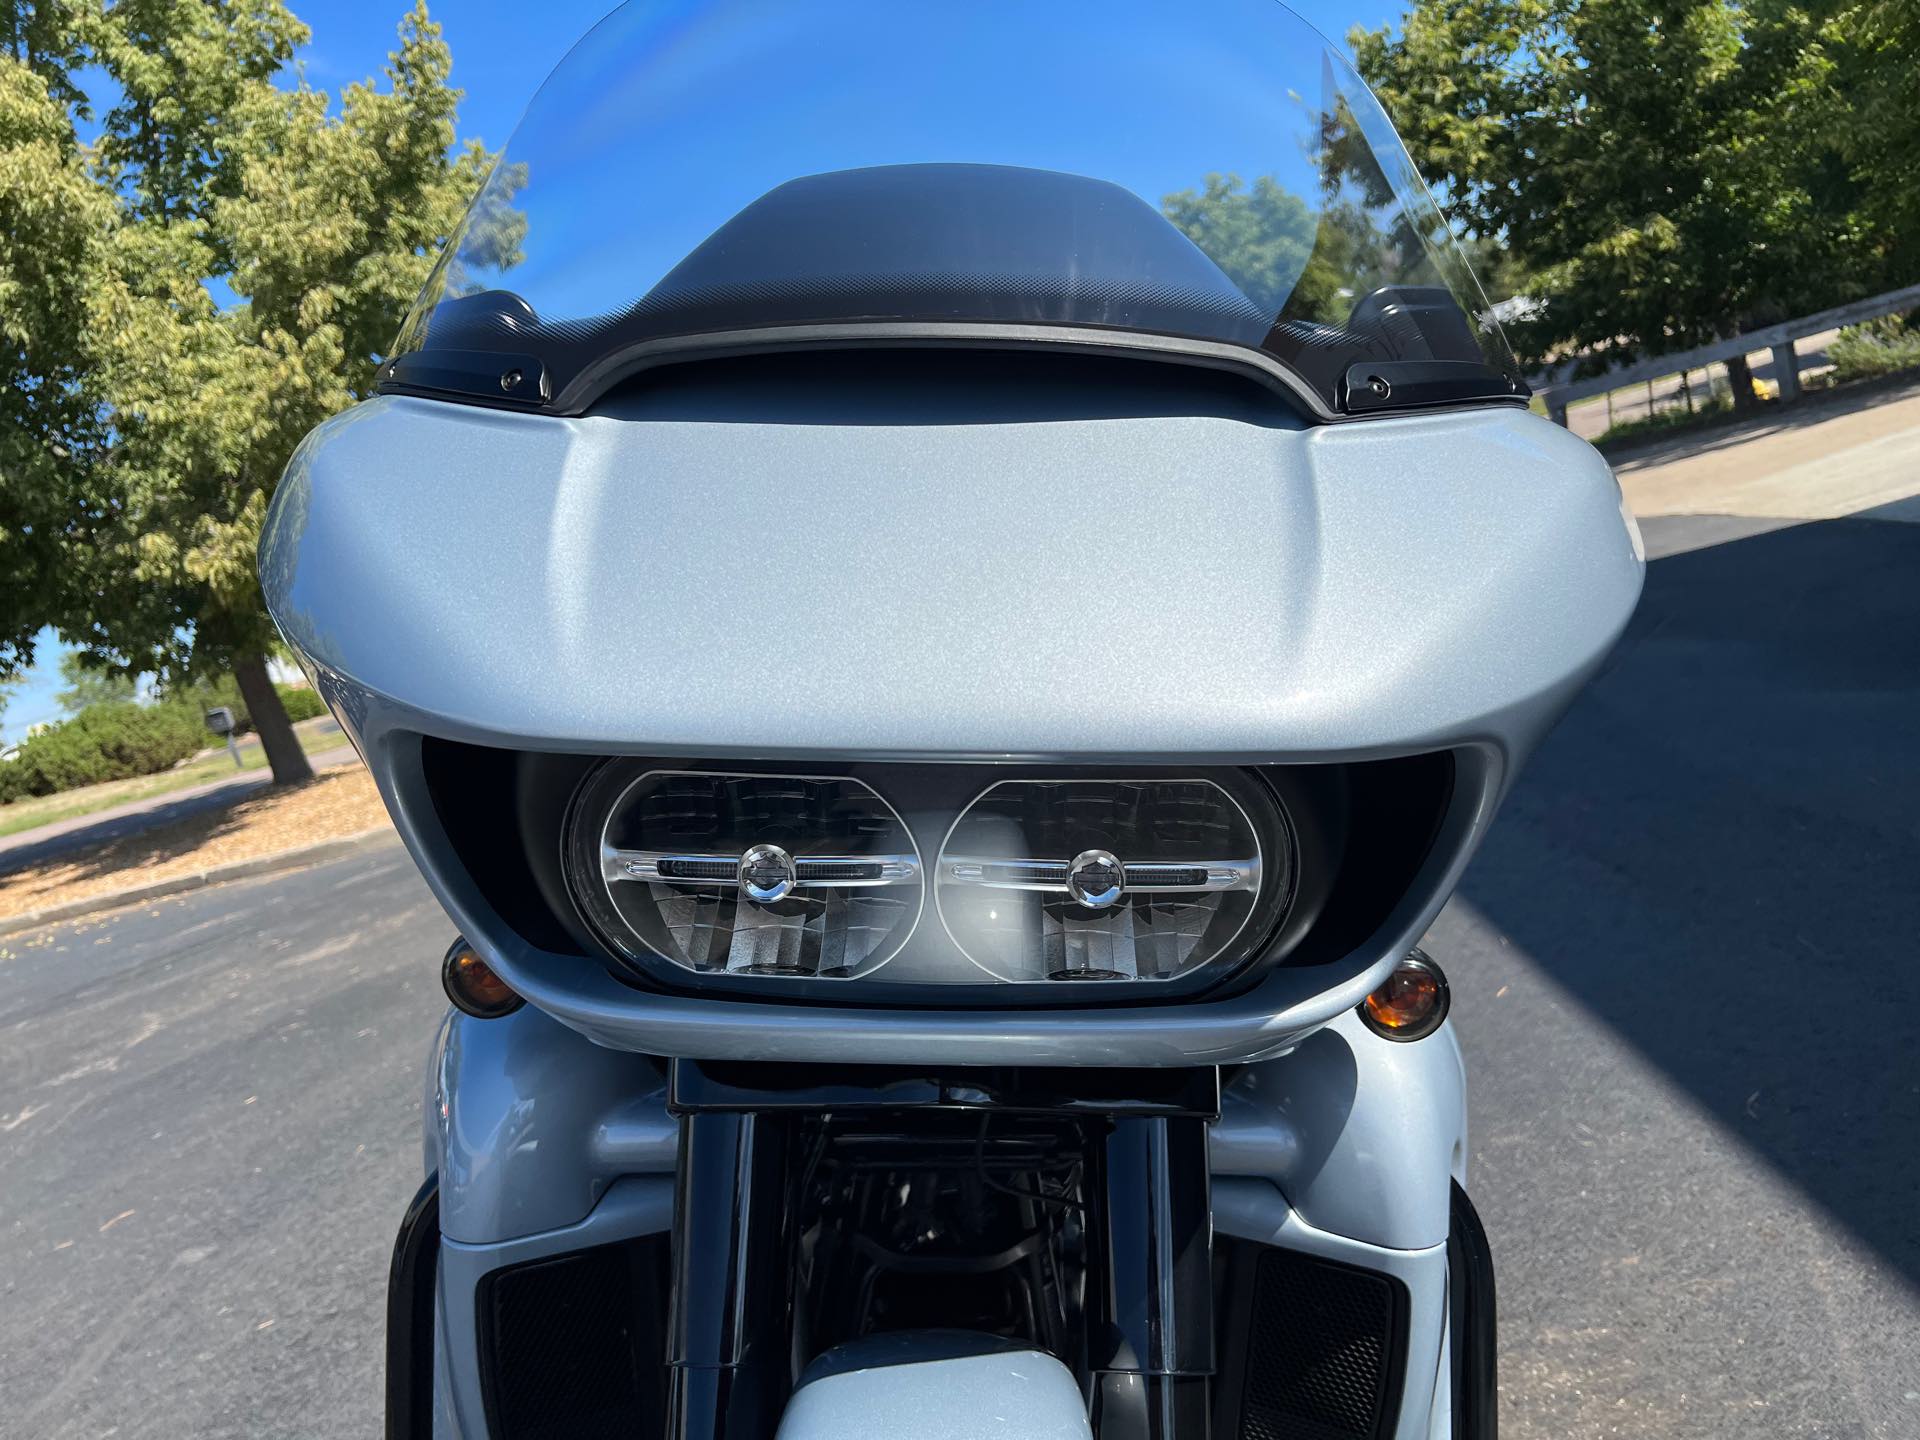 2023 Harley-Davidson Road Glide Limited at Aces Motorcycles - Fort Collins